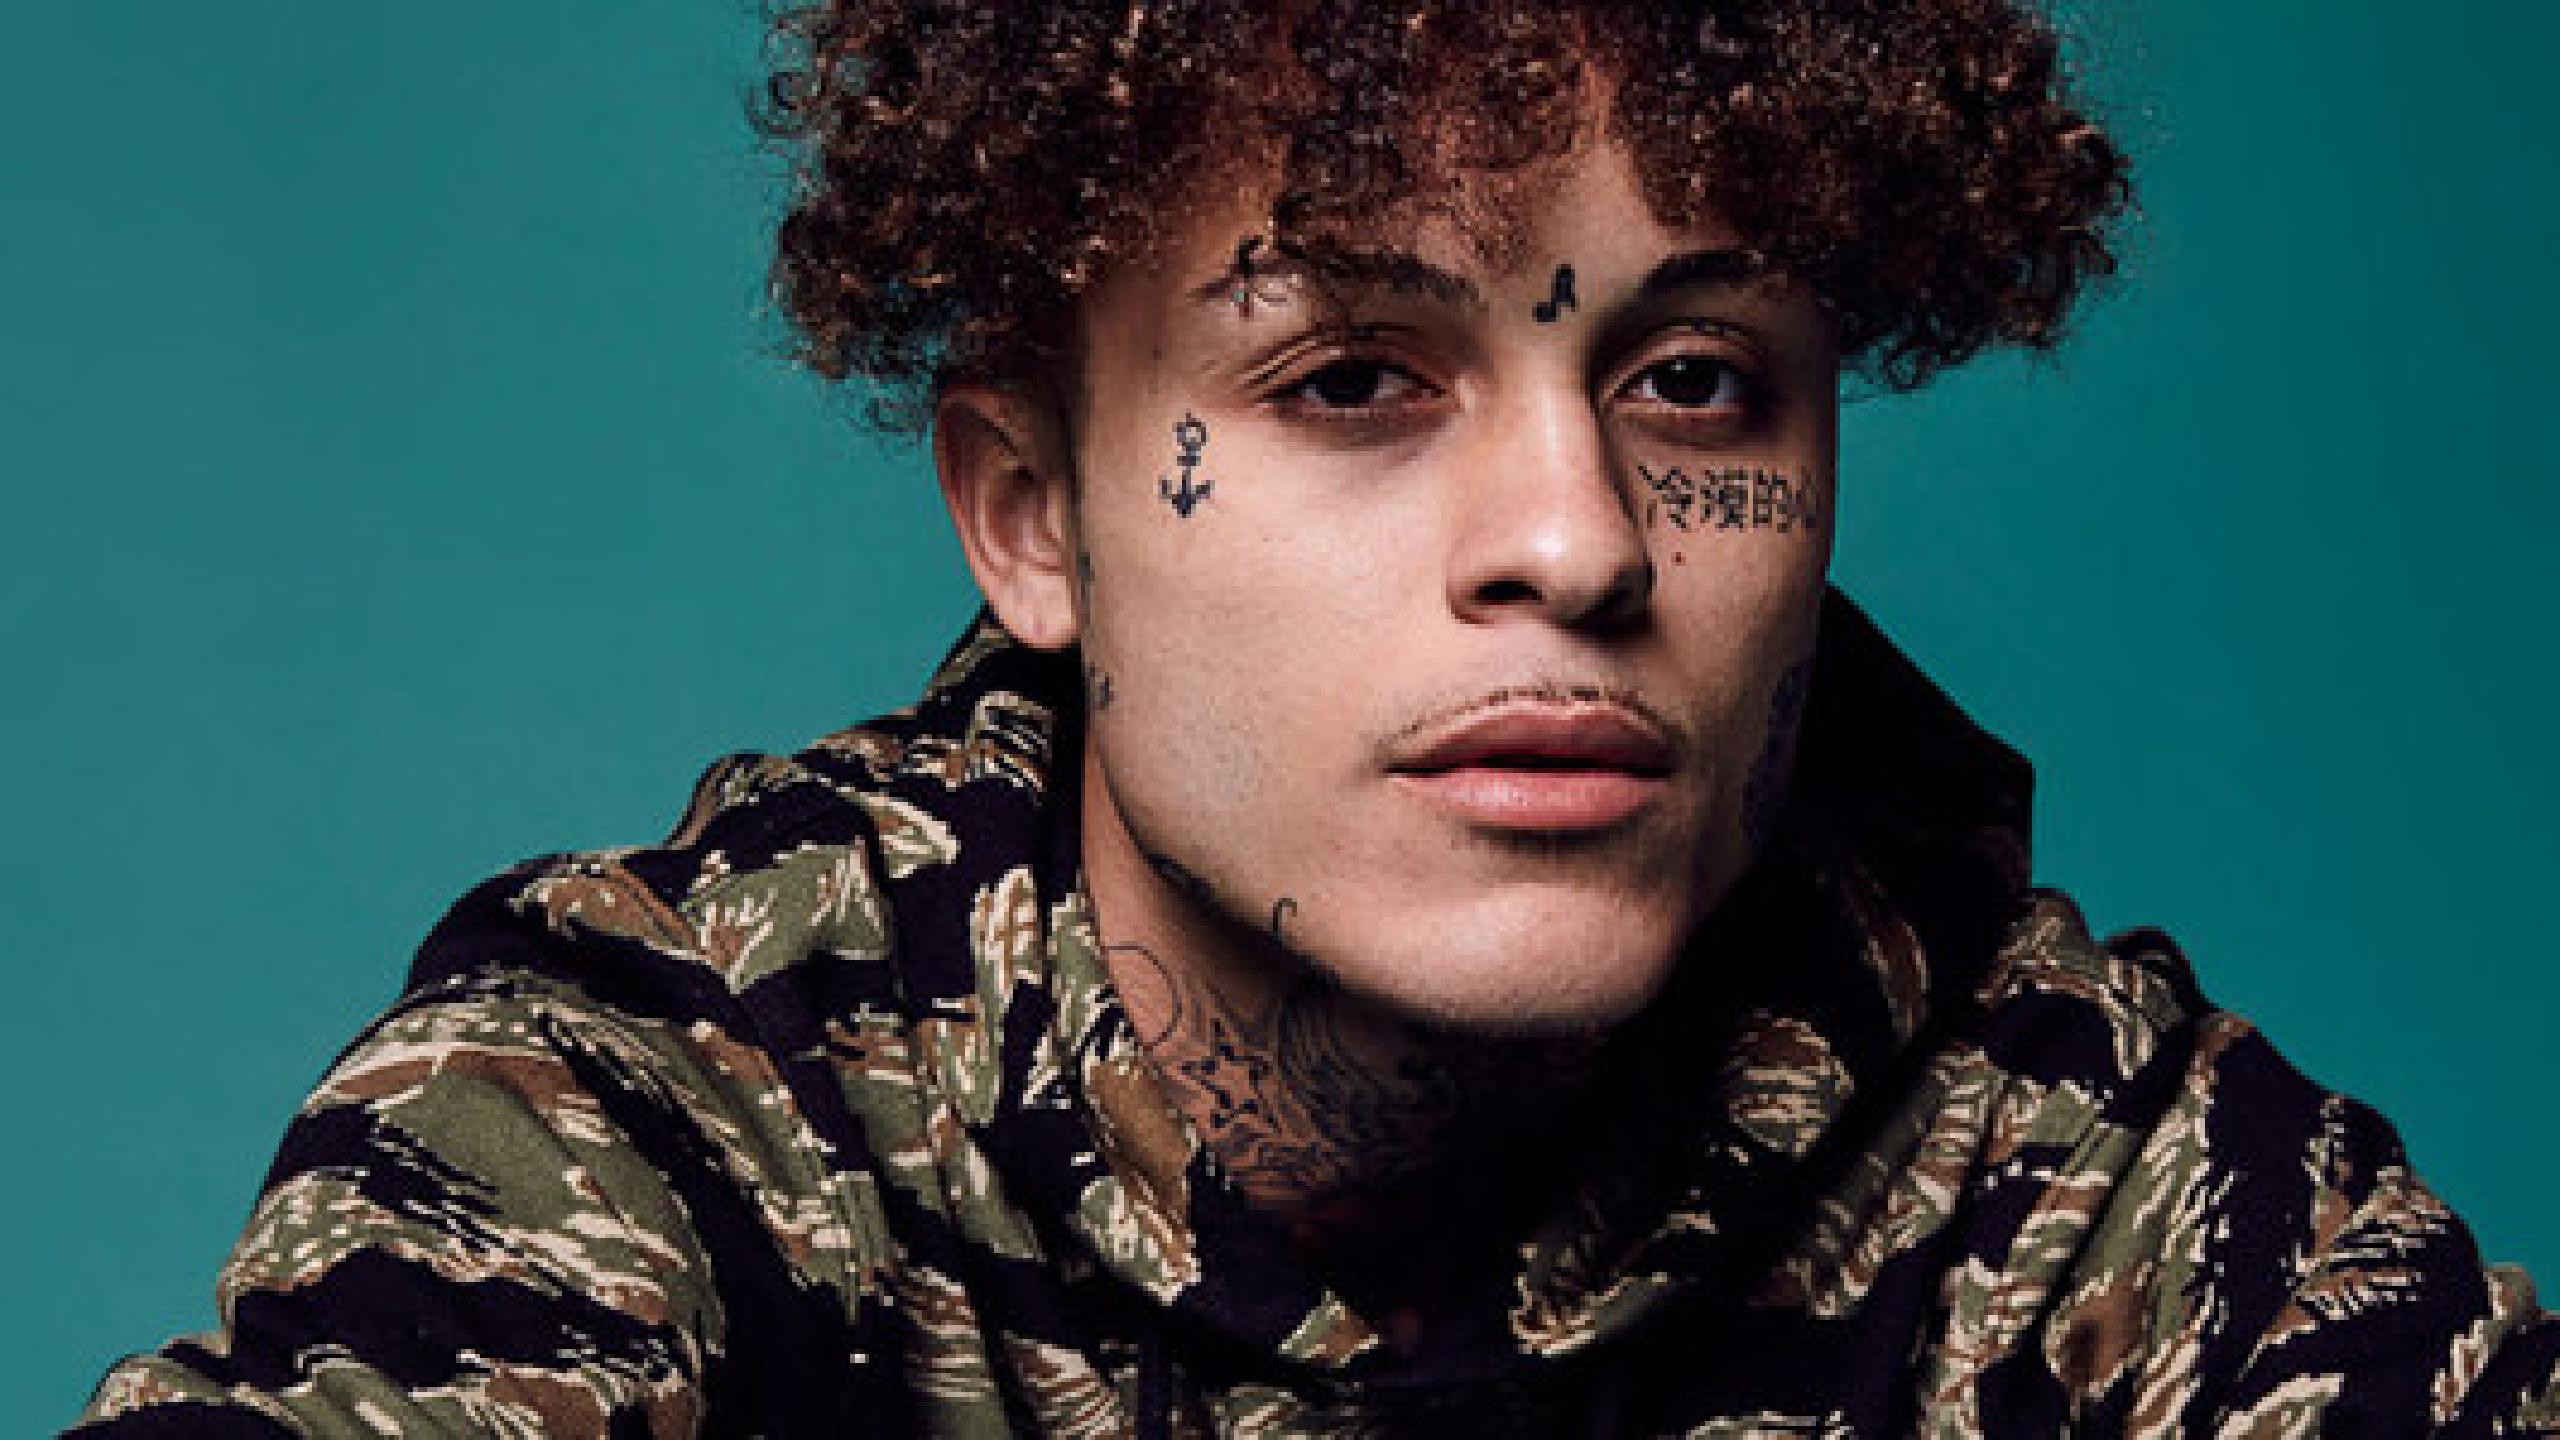 Lil Skies tour dates 2021 2022. Lil Skies tickets and concerts | Wegow  Canada